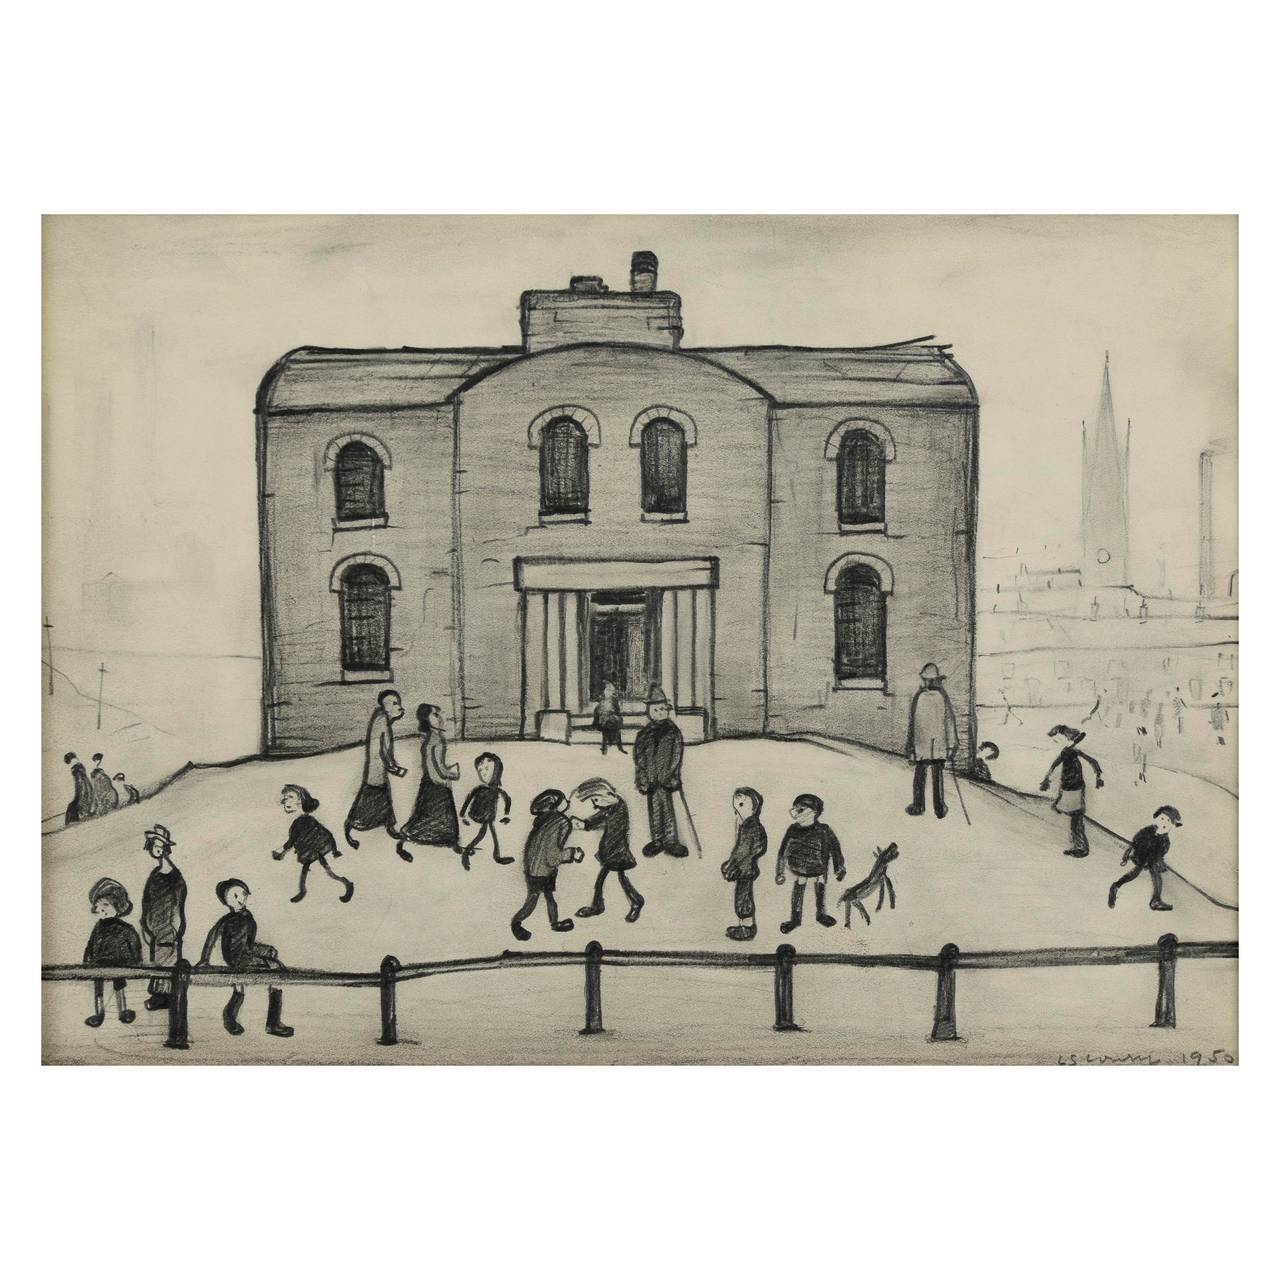 Laurence Stephen Lowry Landscape Art - “Old House”